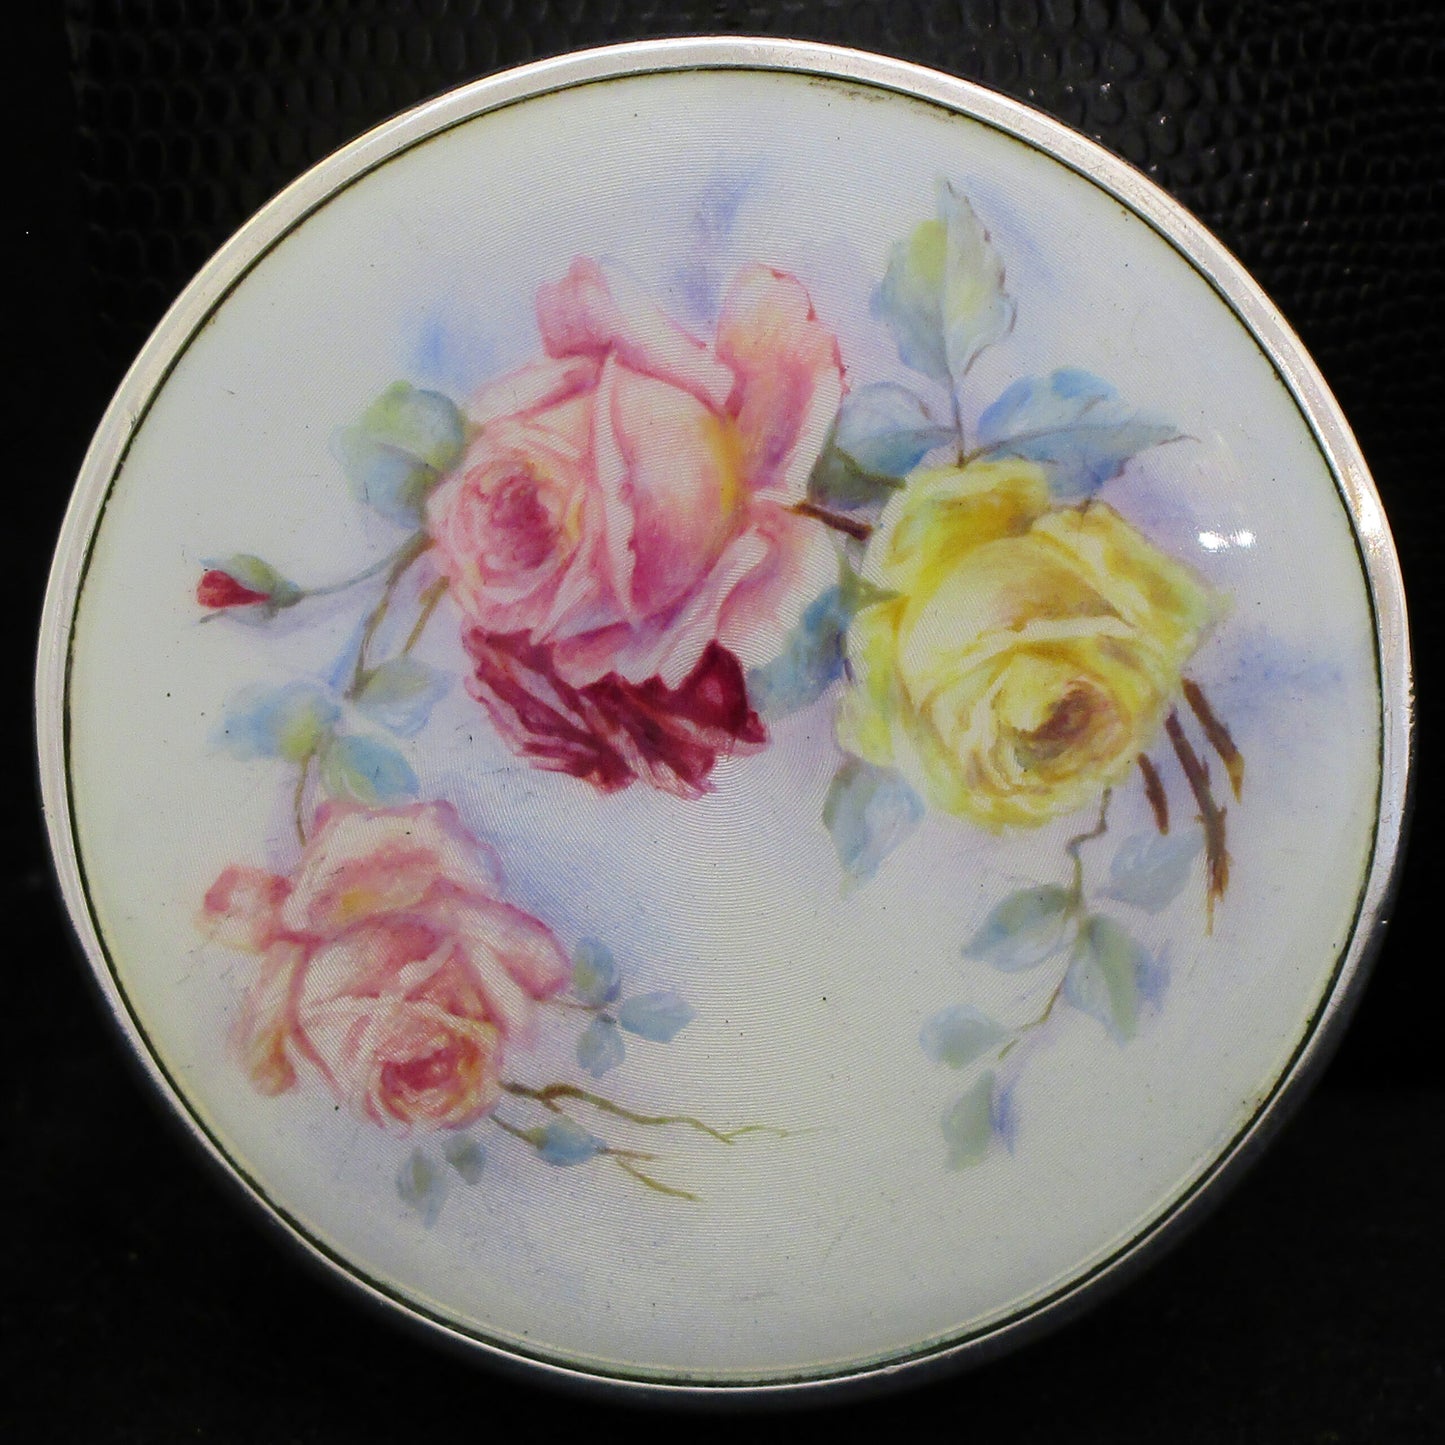 Silver and hand painted enamel box/compact.